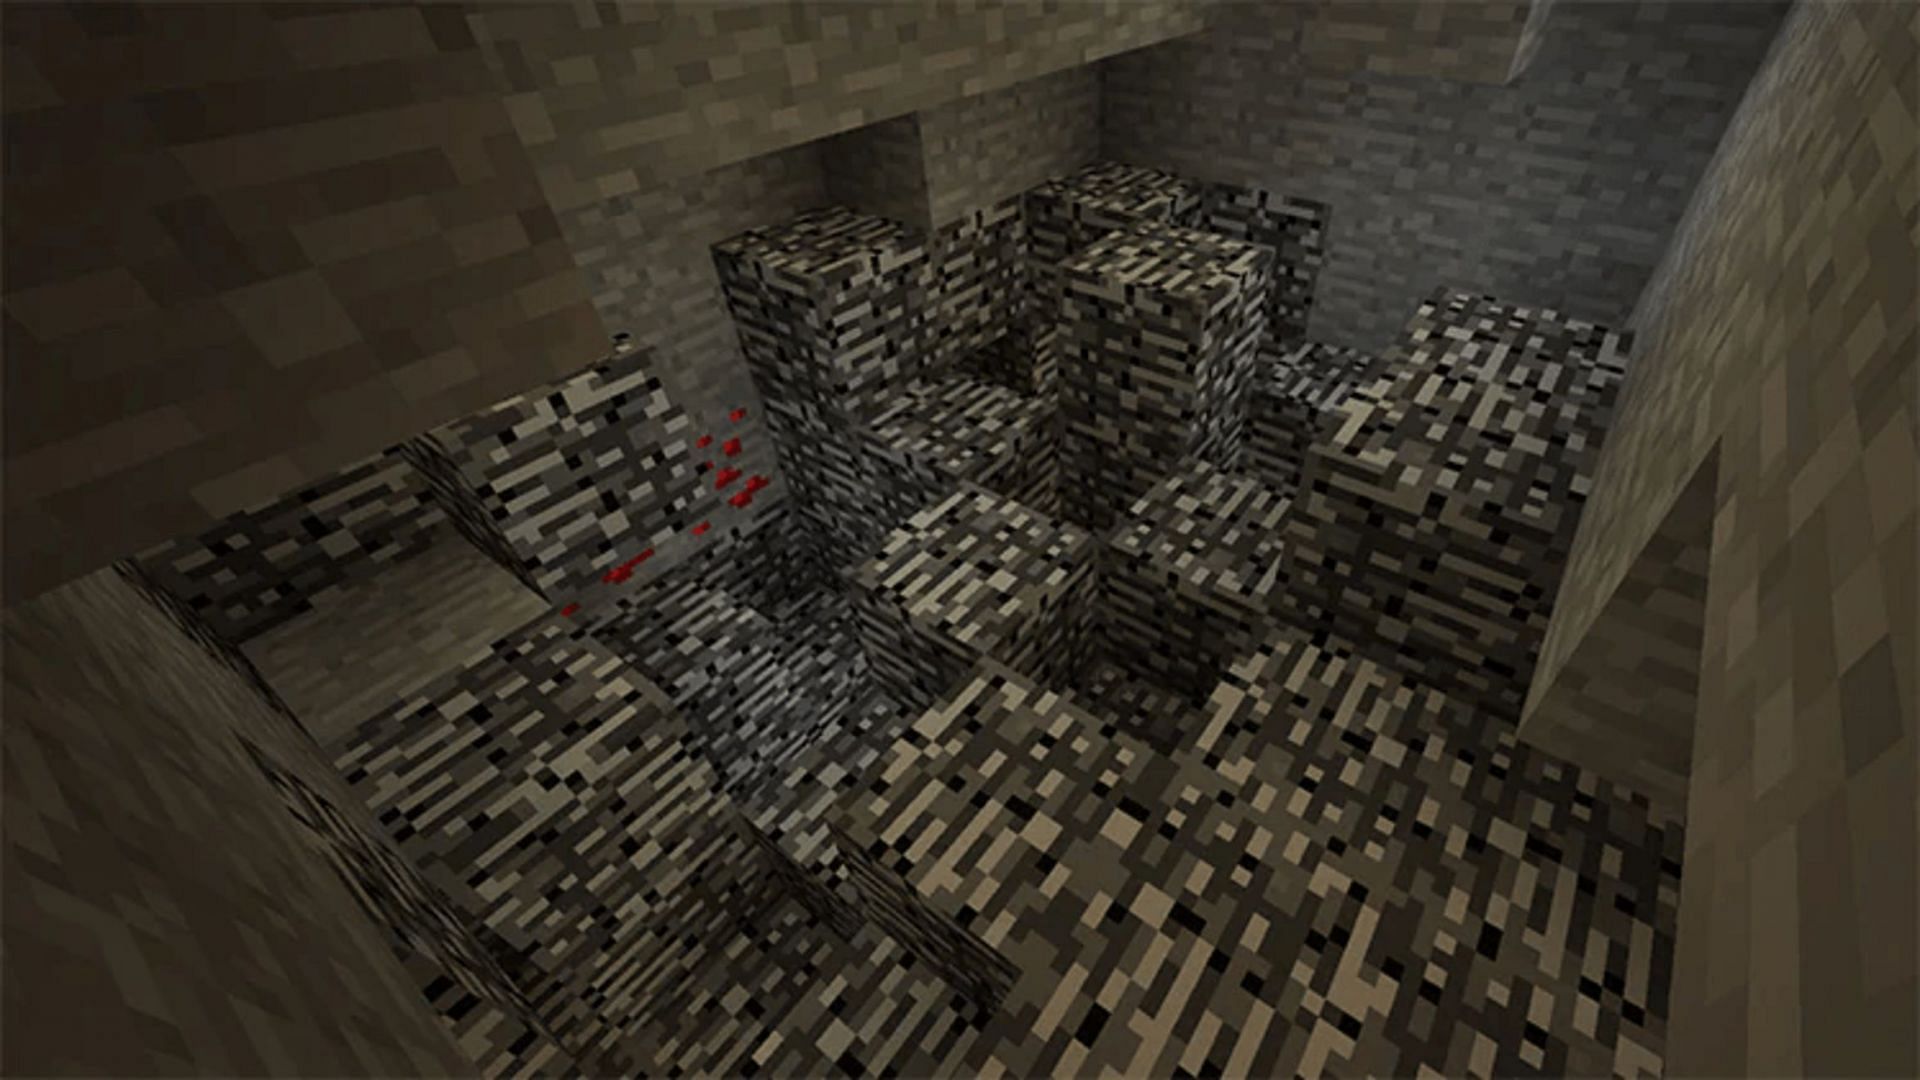 Minecraft players will want to get ready for the deep dark biome ahead of time (Image via Mojang)